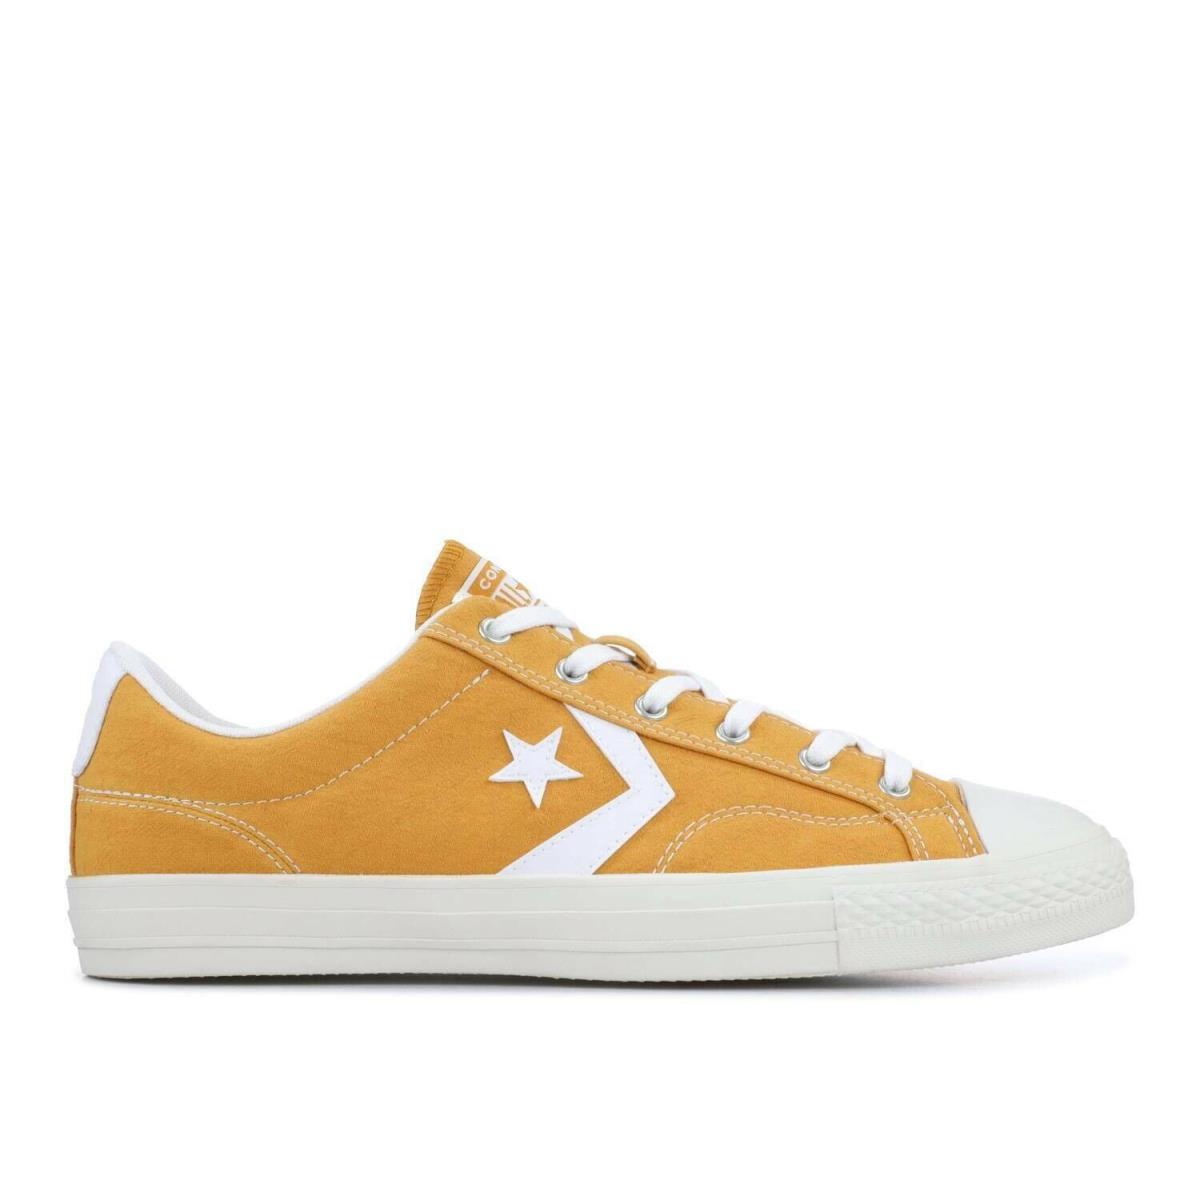 Converse Men`s Size 9 Star Player OX Turmeric Gold White Shoes Sneakers 161568C